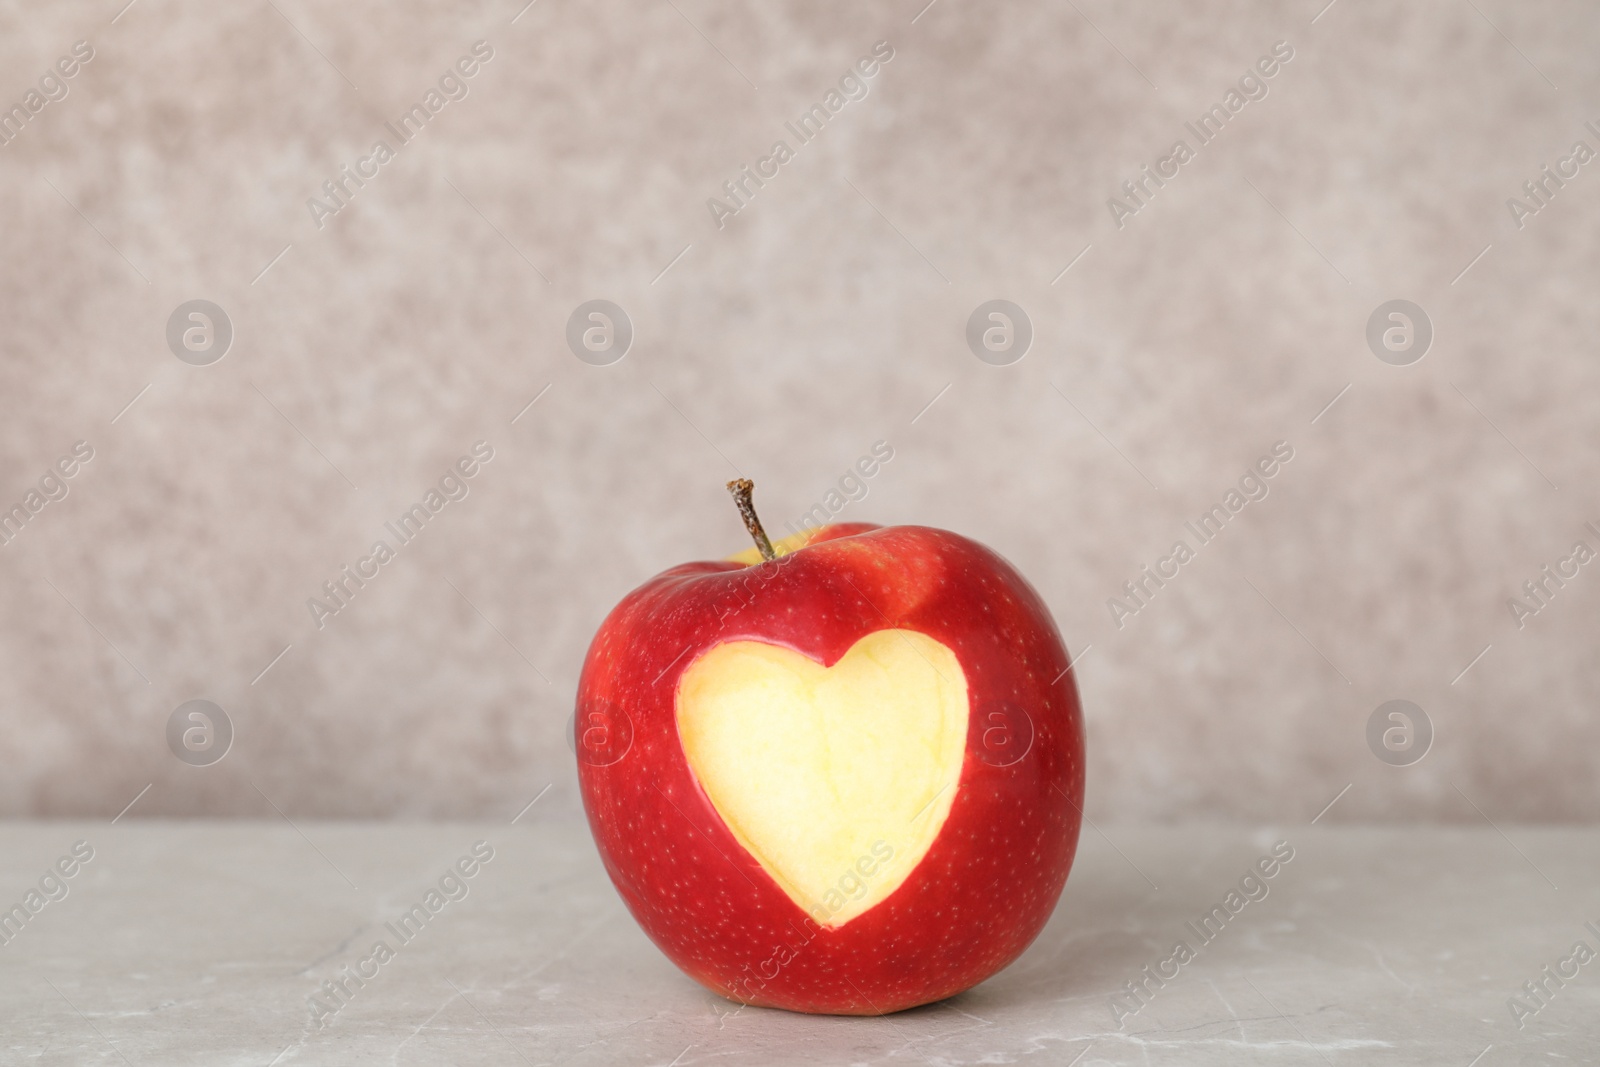 Photo of Red apple with carved heart on table against grey background